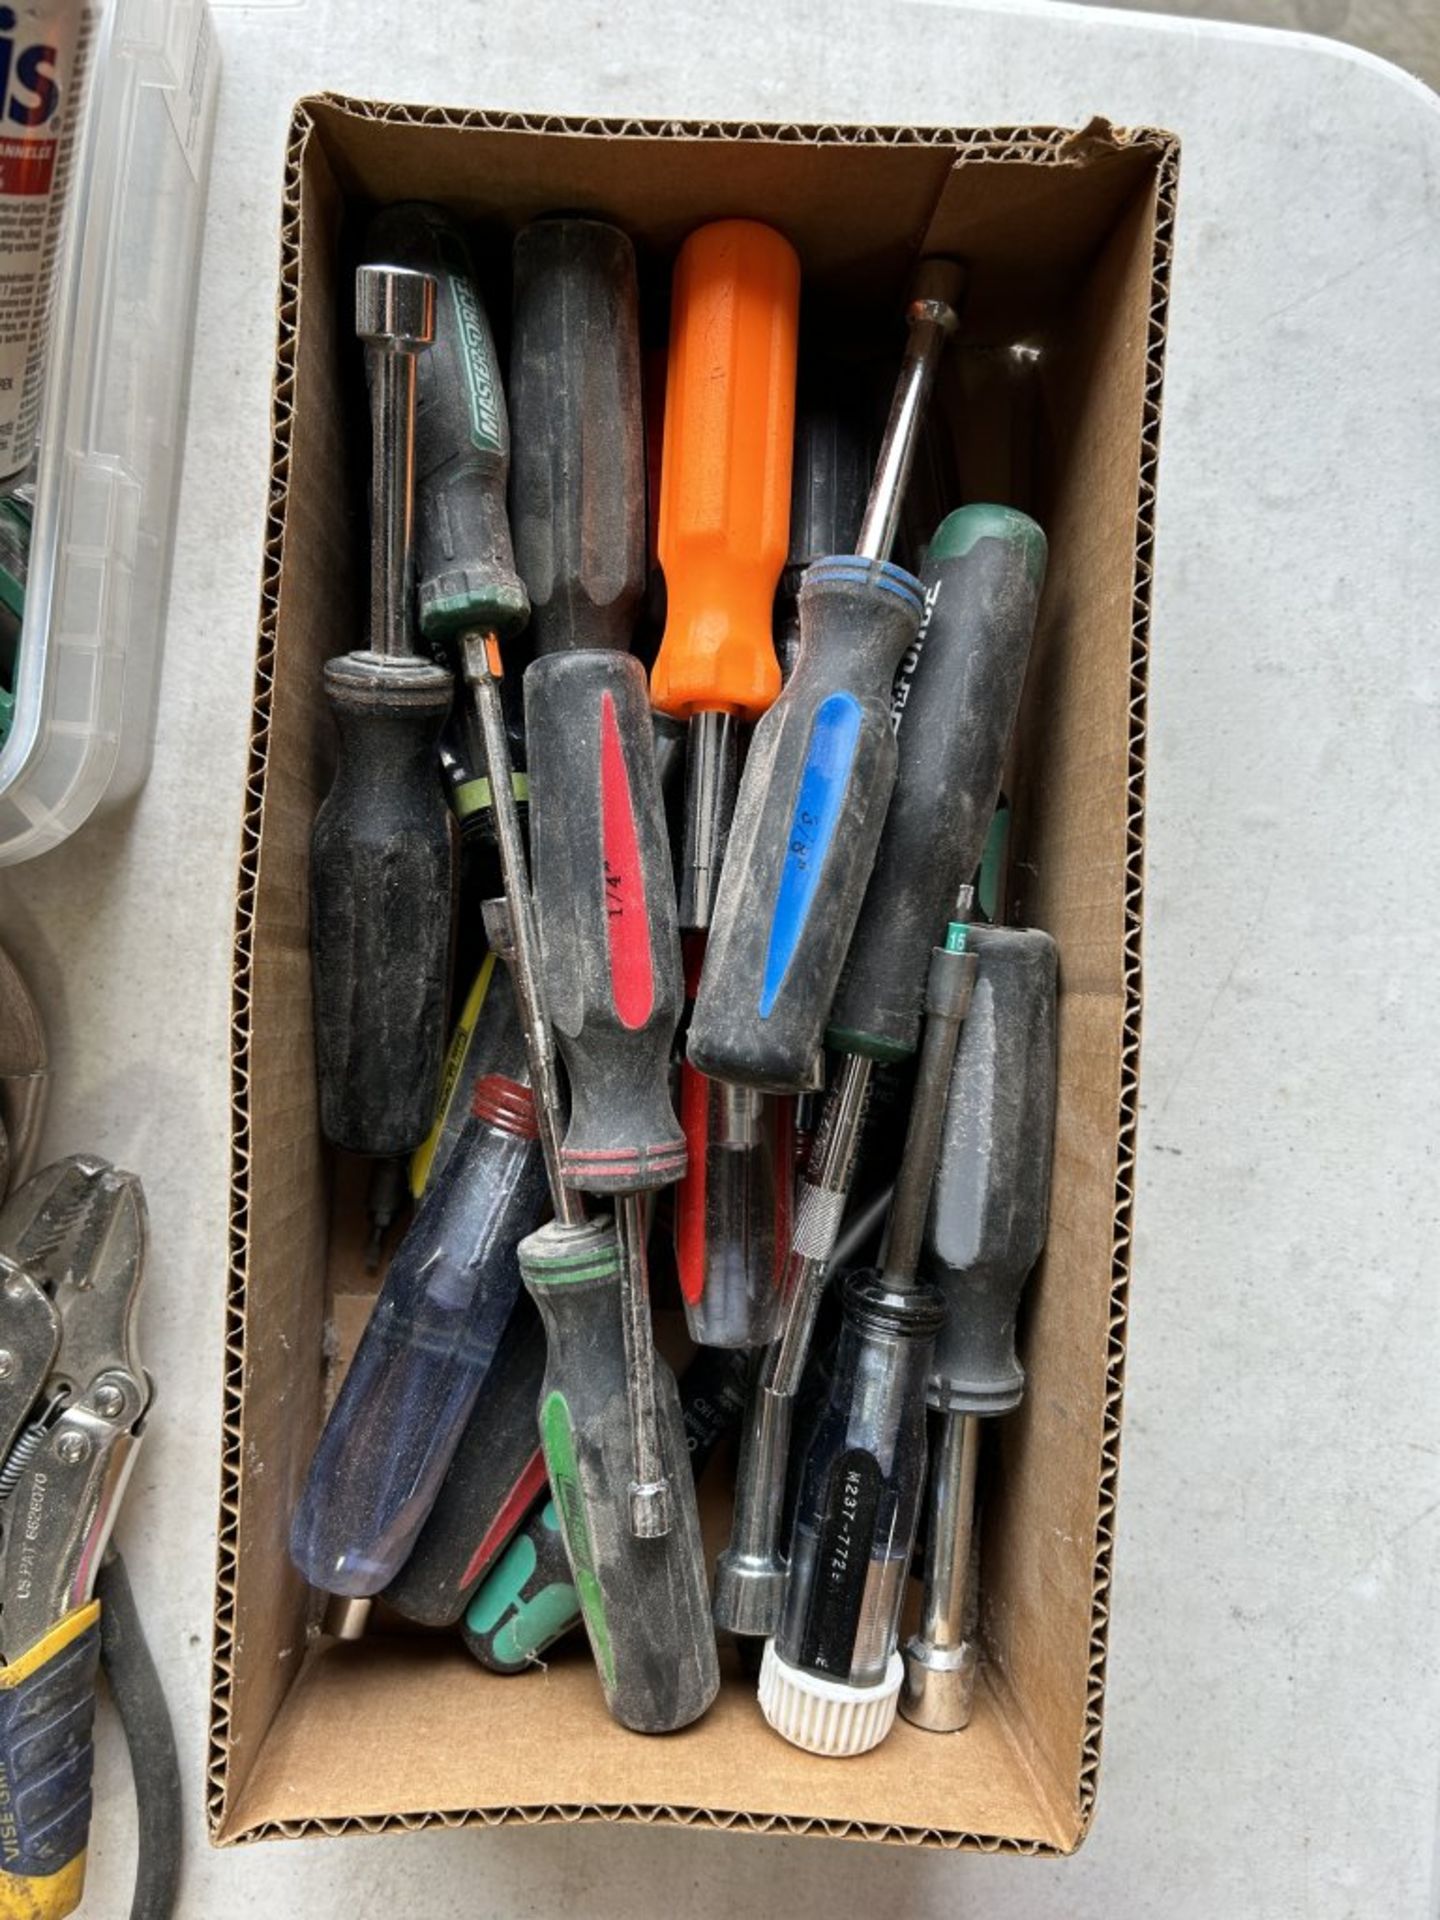 ASSORTED TOOLS INCLUDING PLIERS, TIN SNIPS, SCREWDRIVERS, RAZOR-BLADES, ETC. - Image 6 of 7